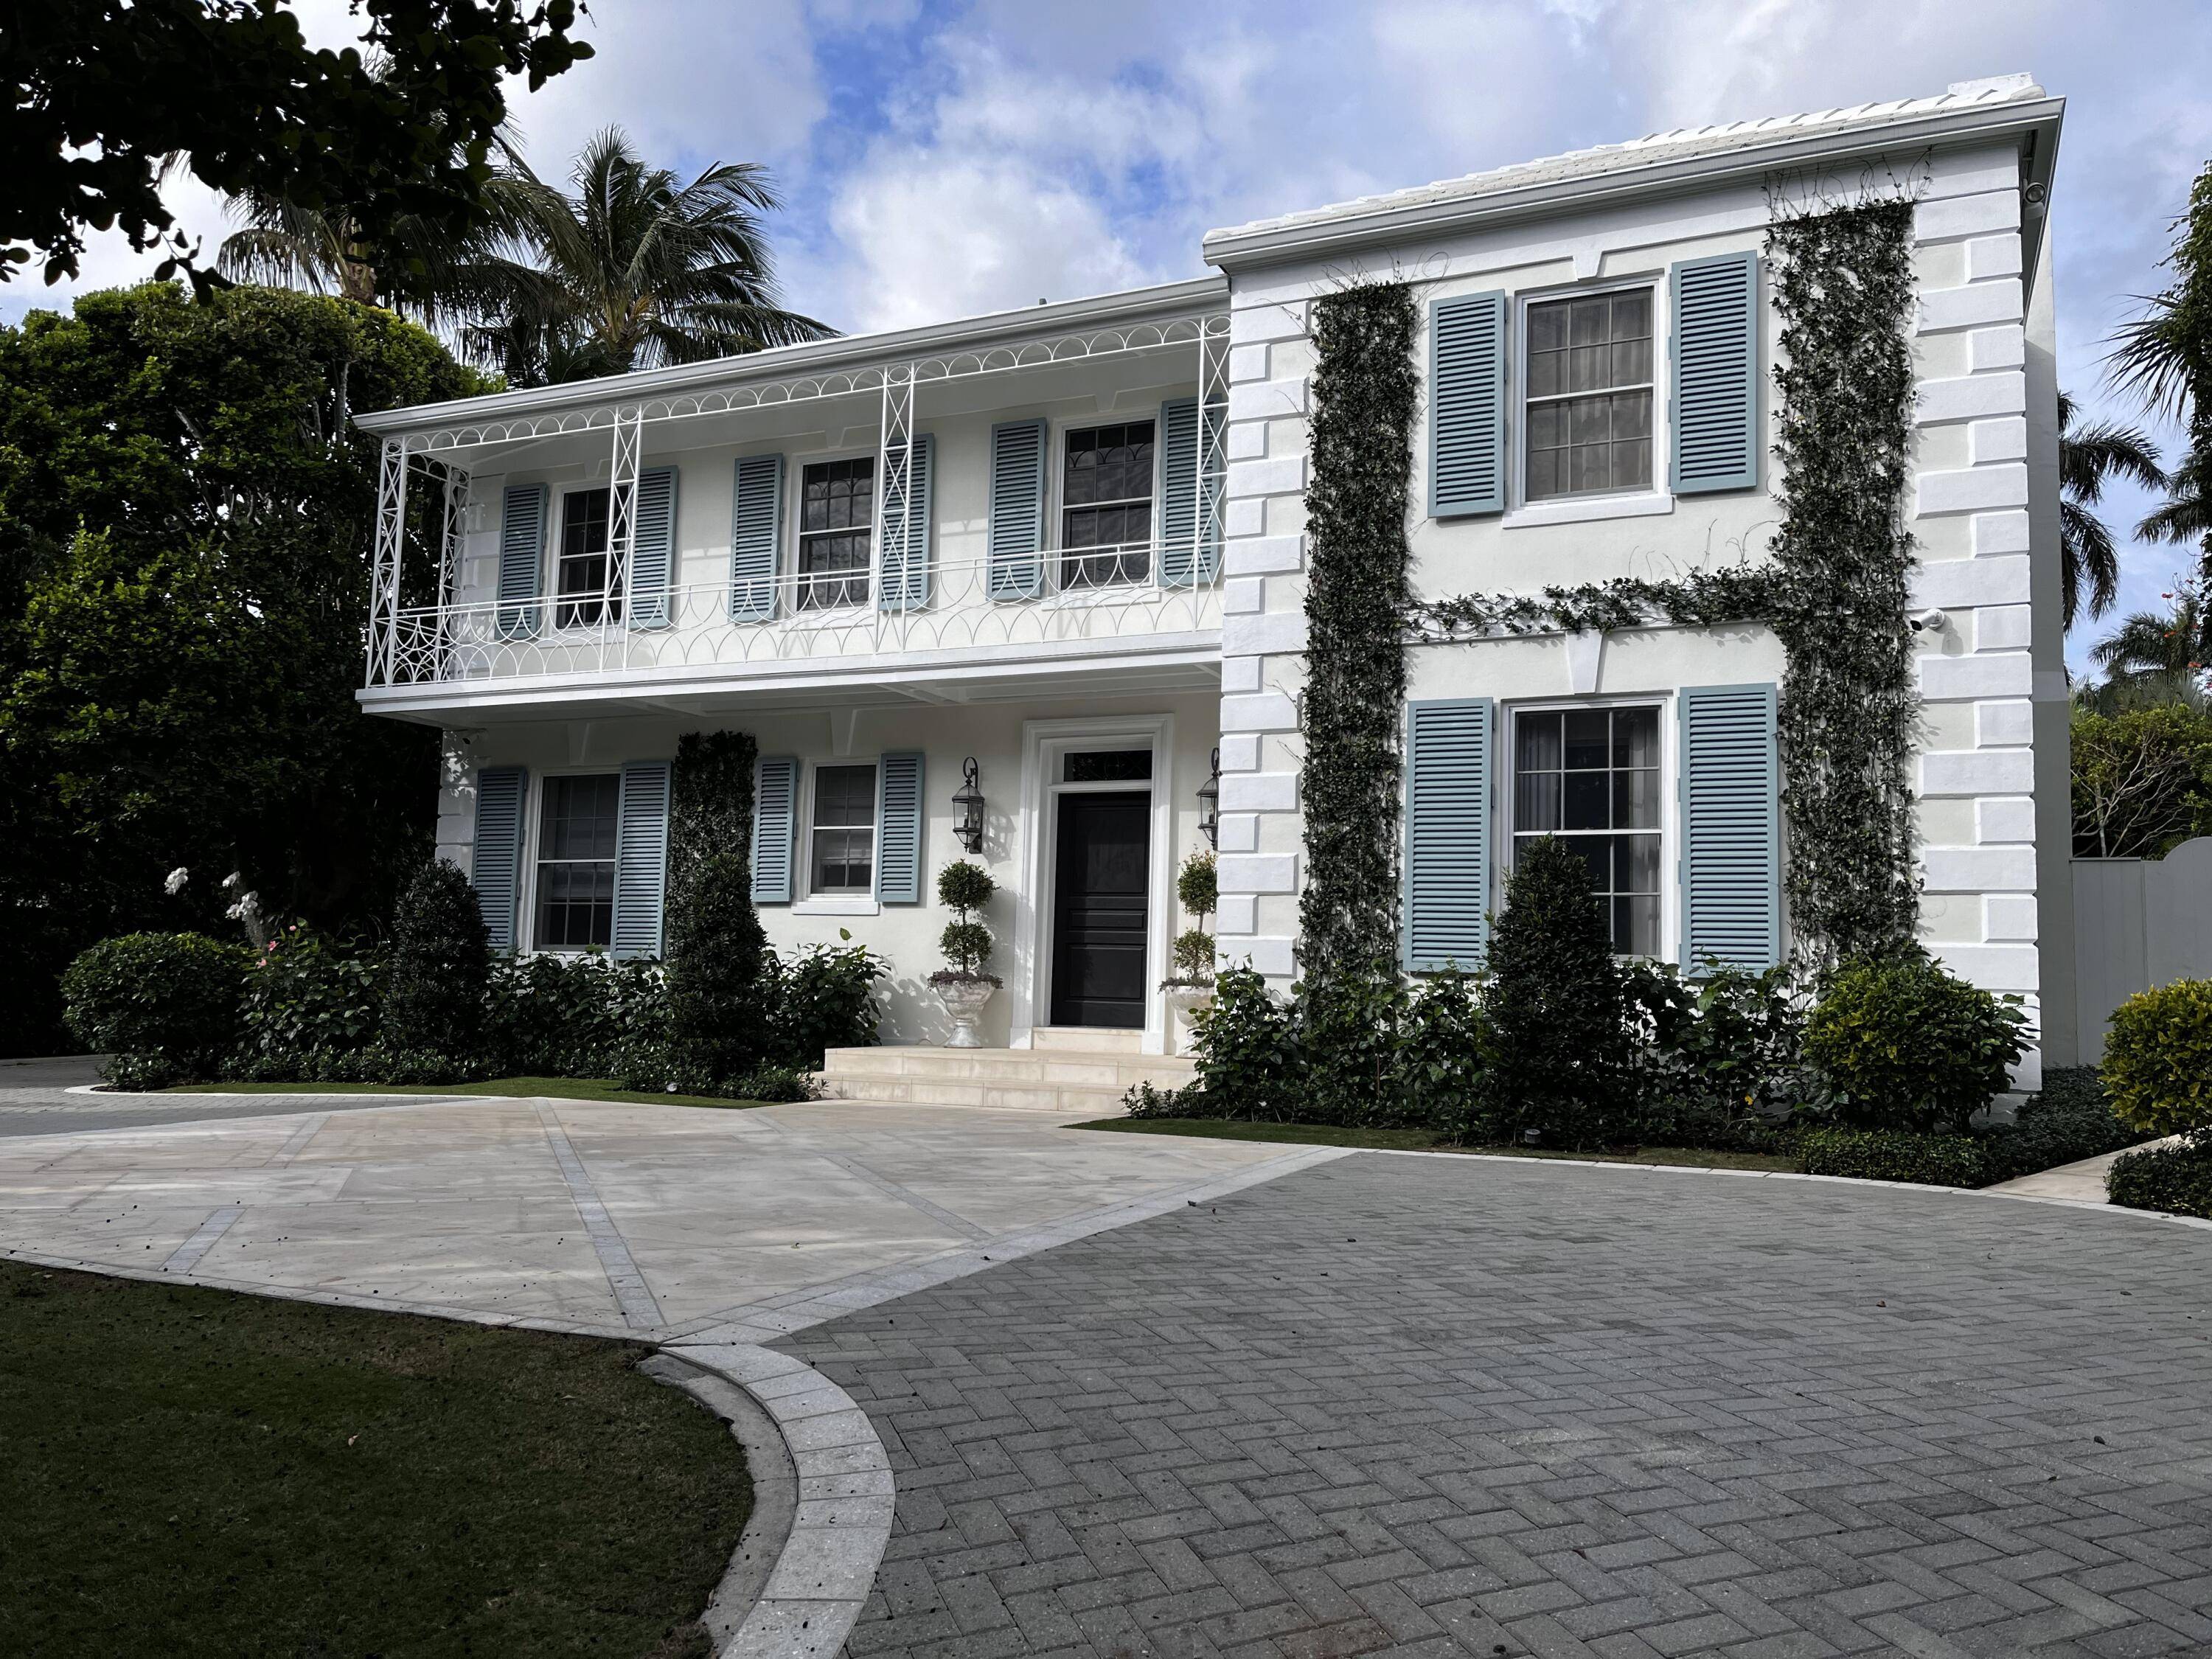 Gorgeously remodeled Monterey Colonial home designed by renowned Palm Beach architect John Volk.